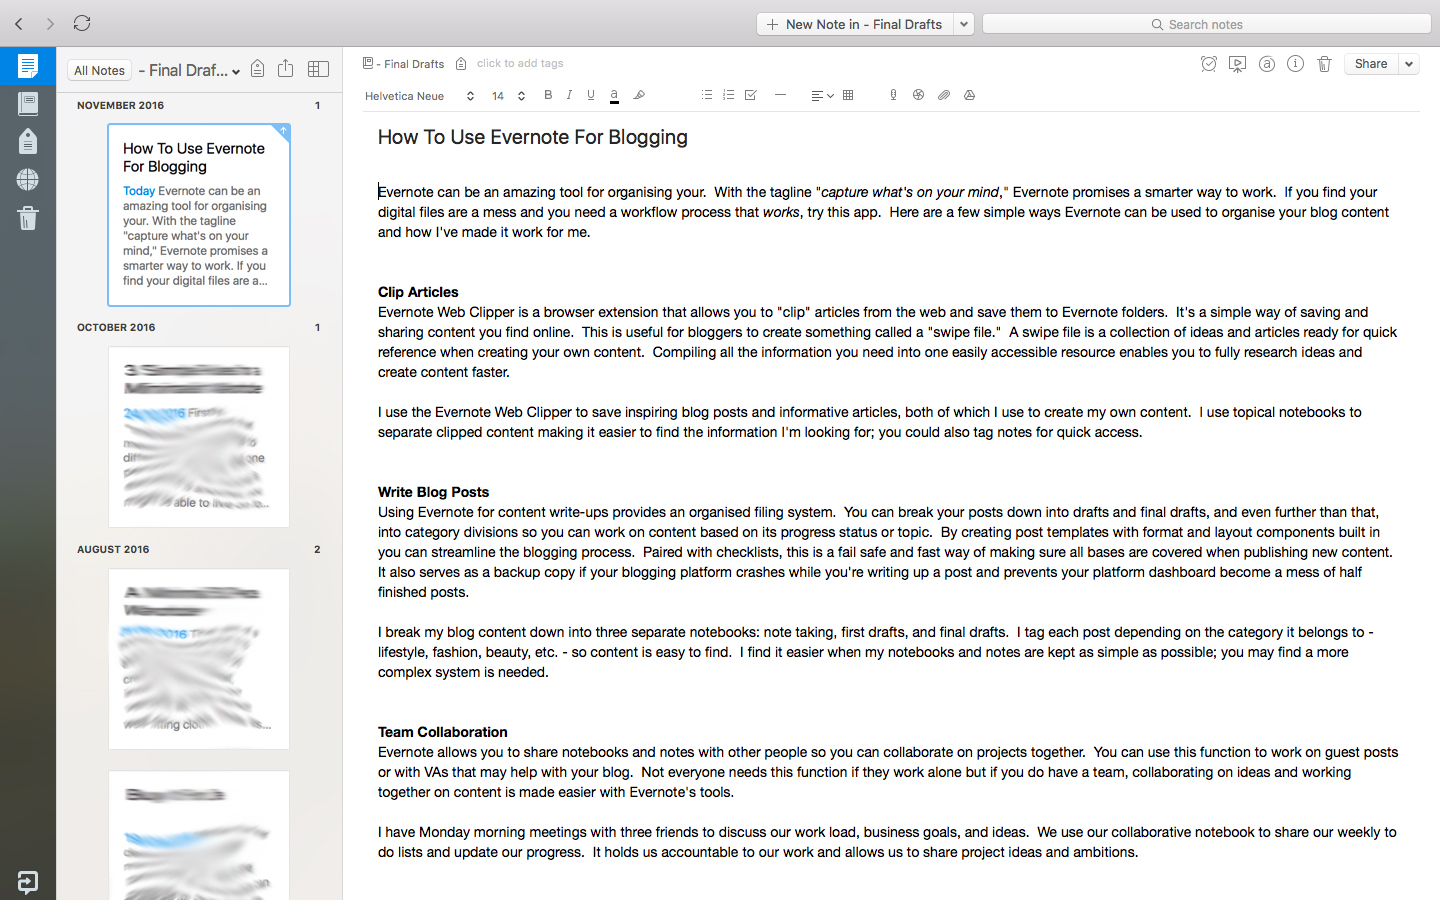 How To Use Evernote For Blogging